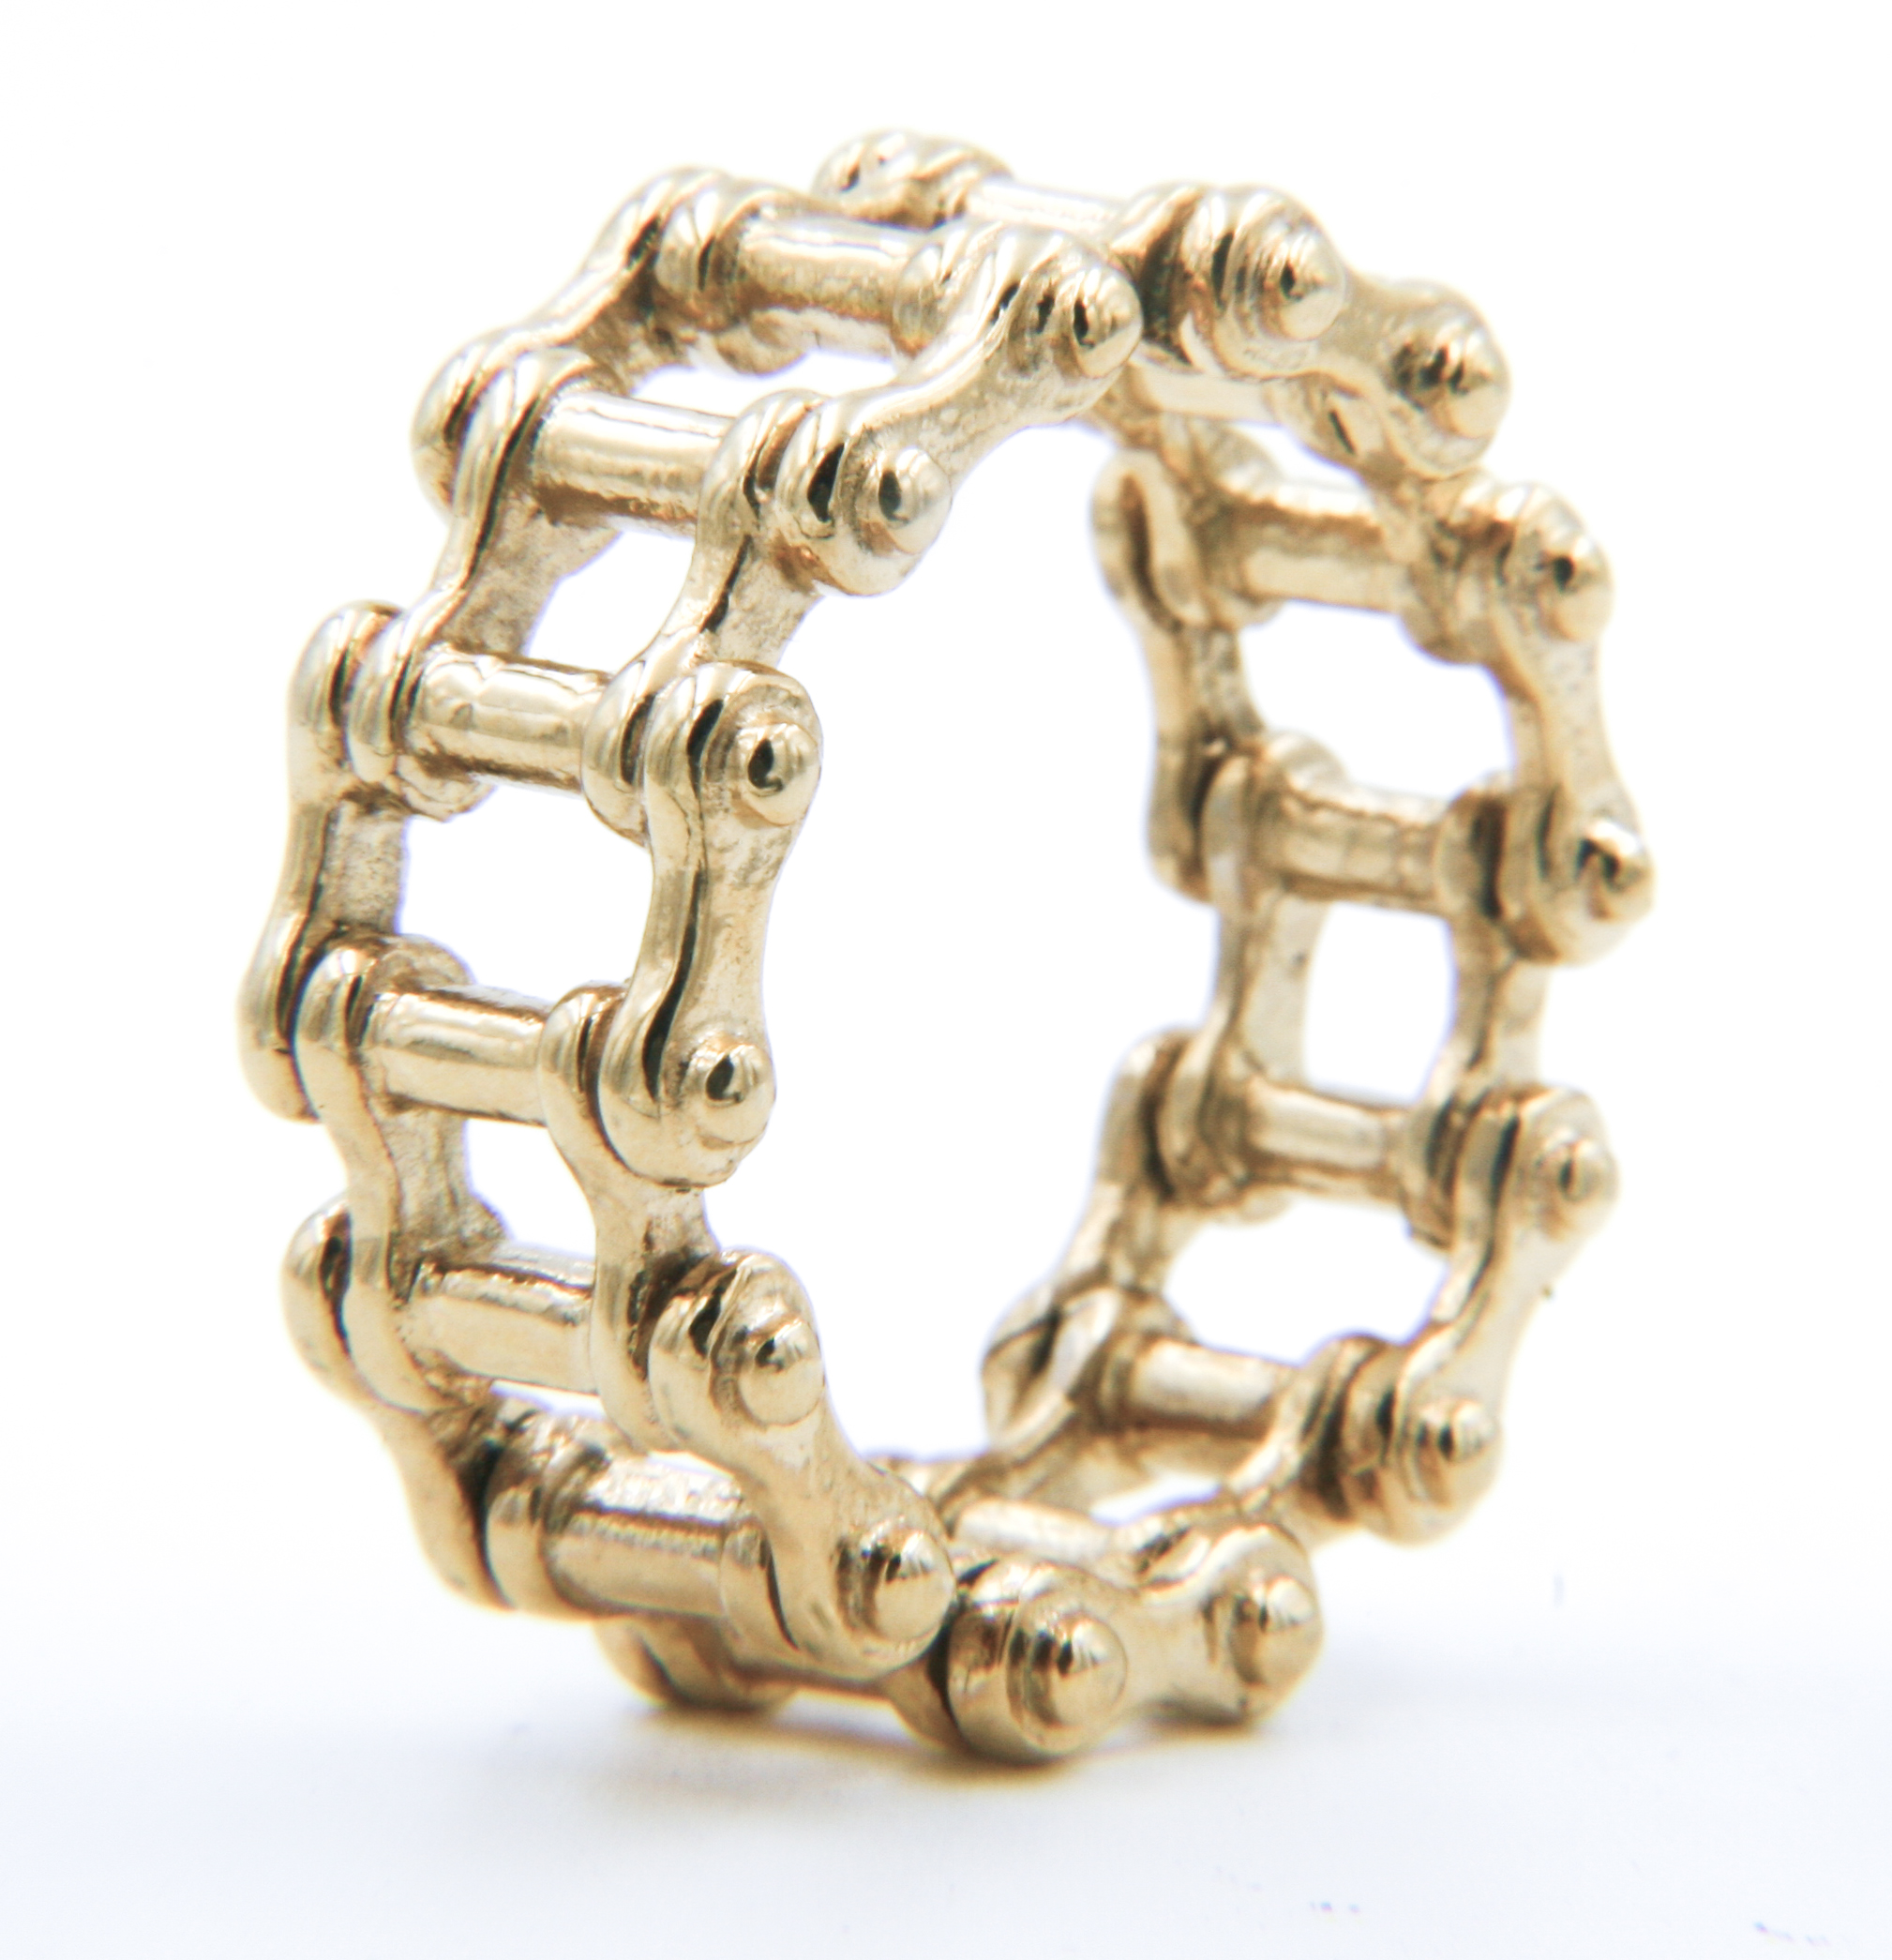 Garbaruk 34T Gold Boost 3mm GXP | DUB Oval Chain Ring – Dcbikes